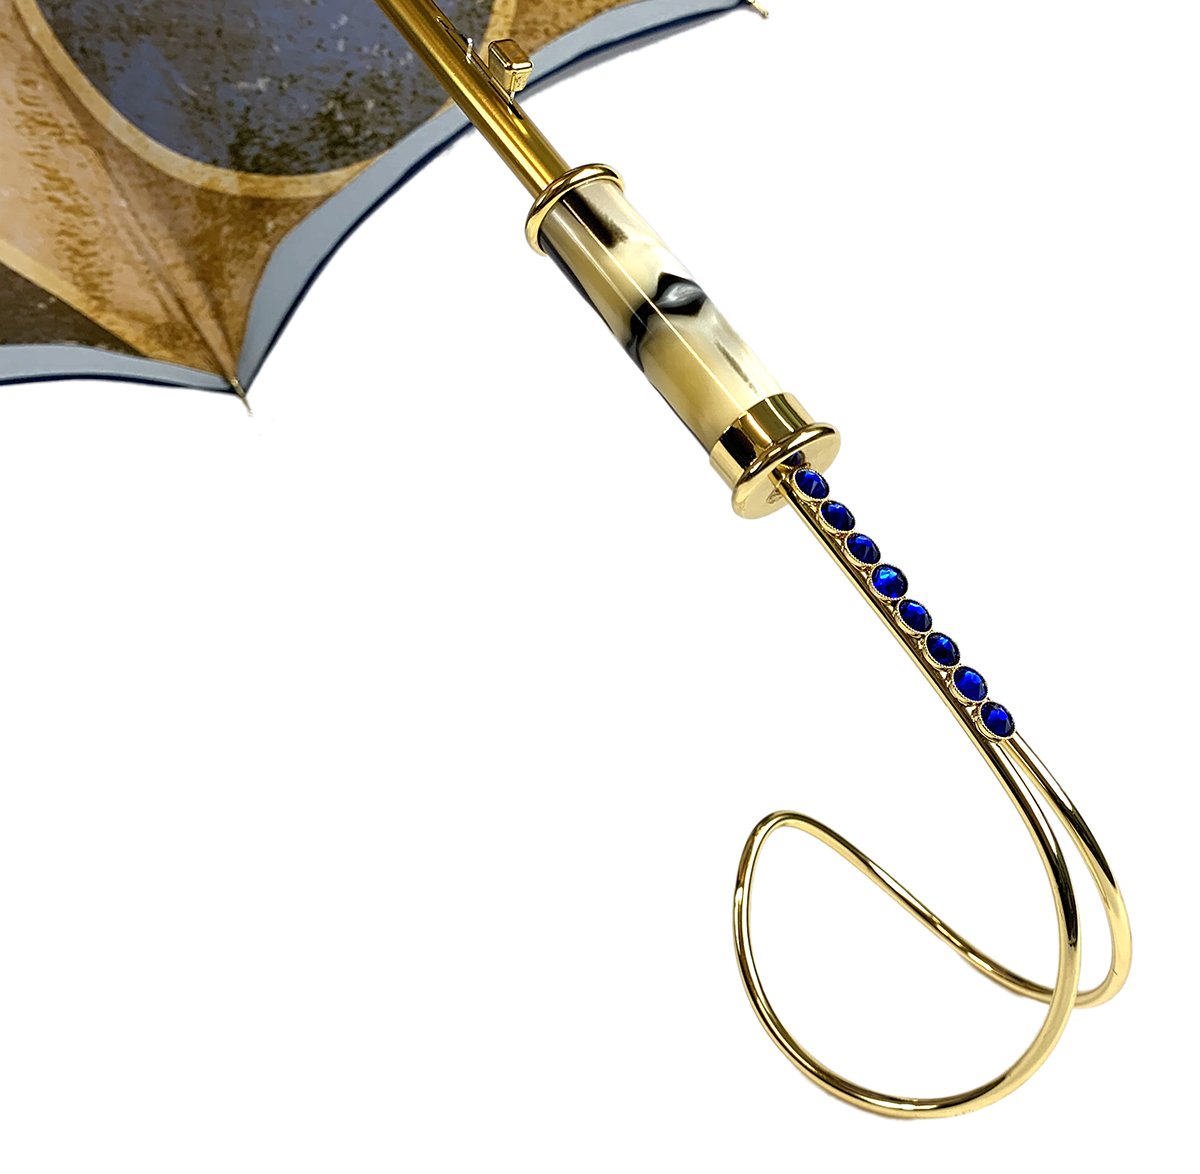 Handcrafted Umbrella Exclusive Abstract Design - IL MARCHESATO LUXURY UMBRELLAS, CANES AND SHOEHORNS